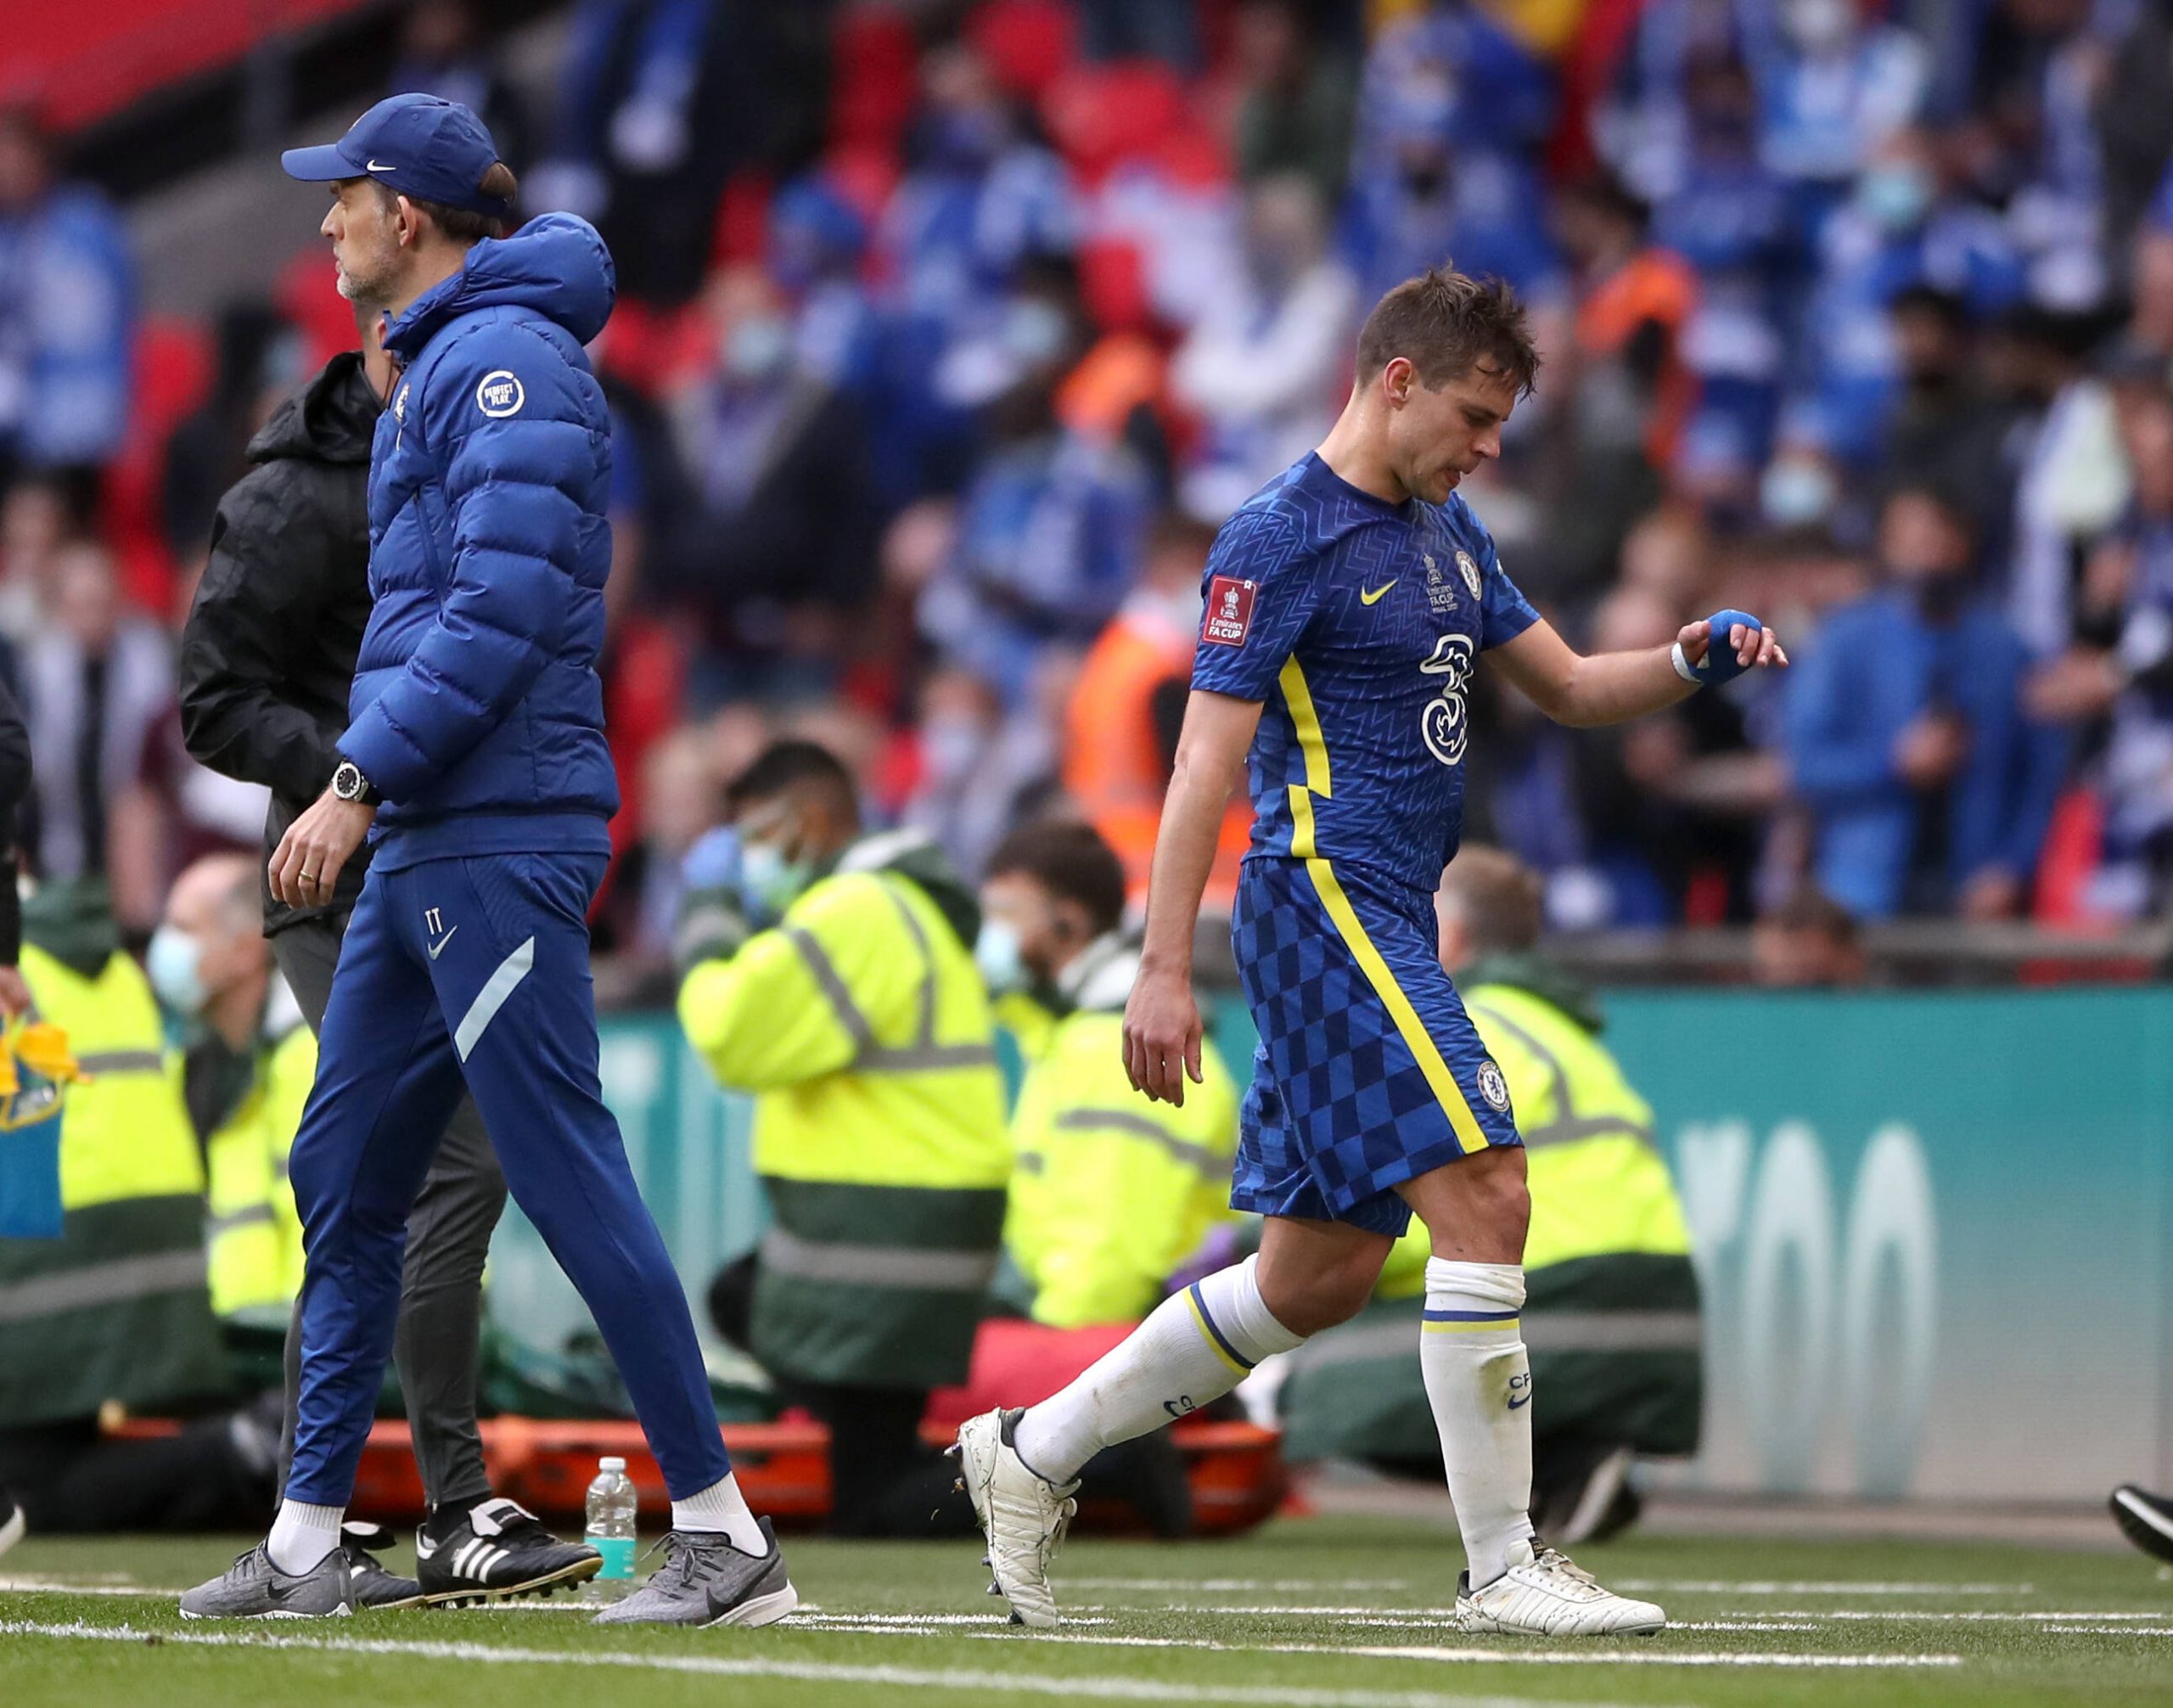 Cesar Azpilicueta saw Chelsea lose to Leicester City in the FA Cup final but now has eye on the UCL final.